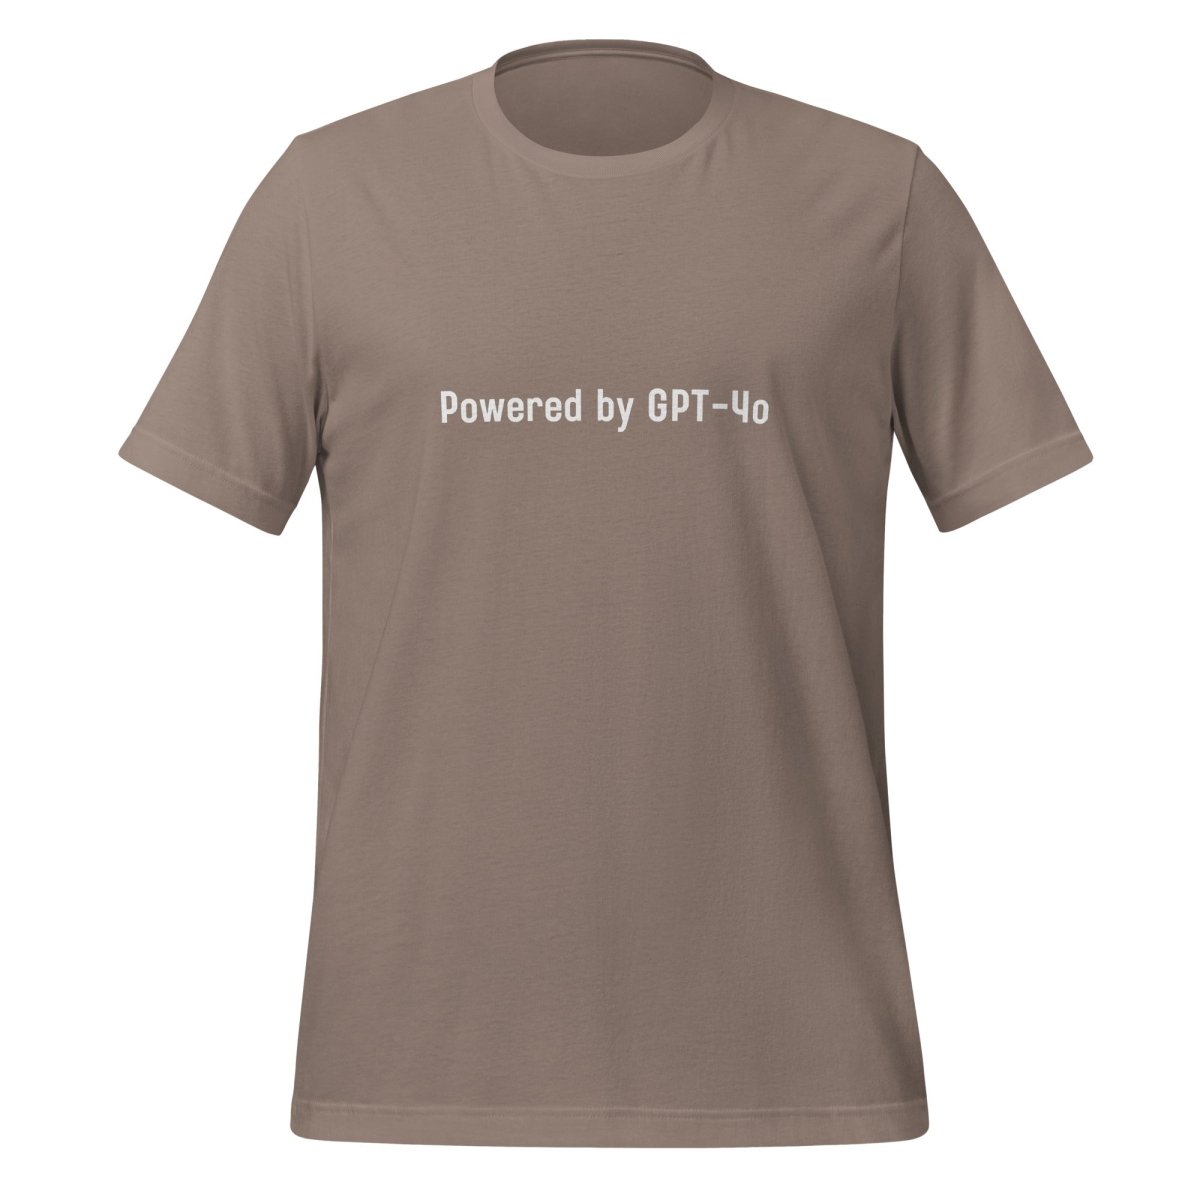 Powered by GPT - 4o T - Shirt 3 (unisex) - Pebble - AI Store